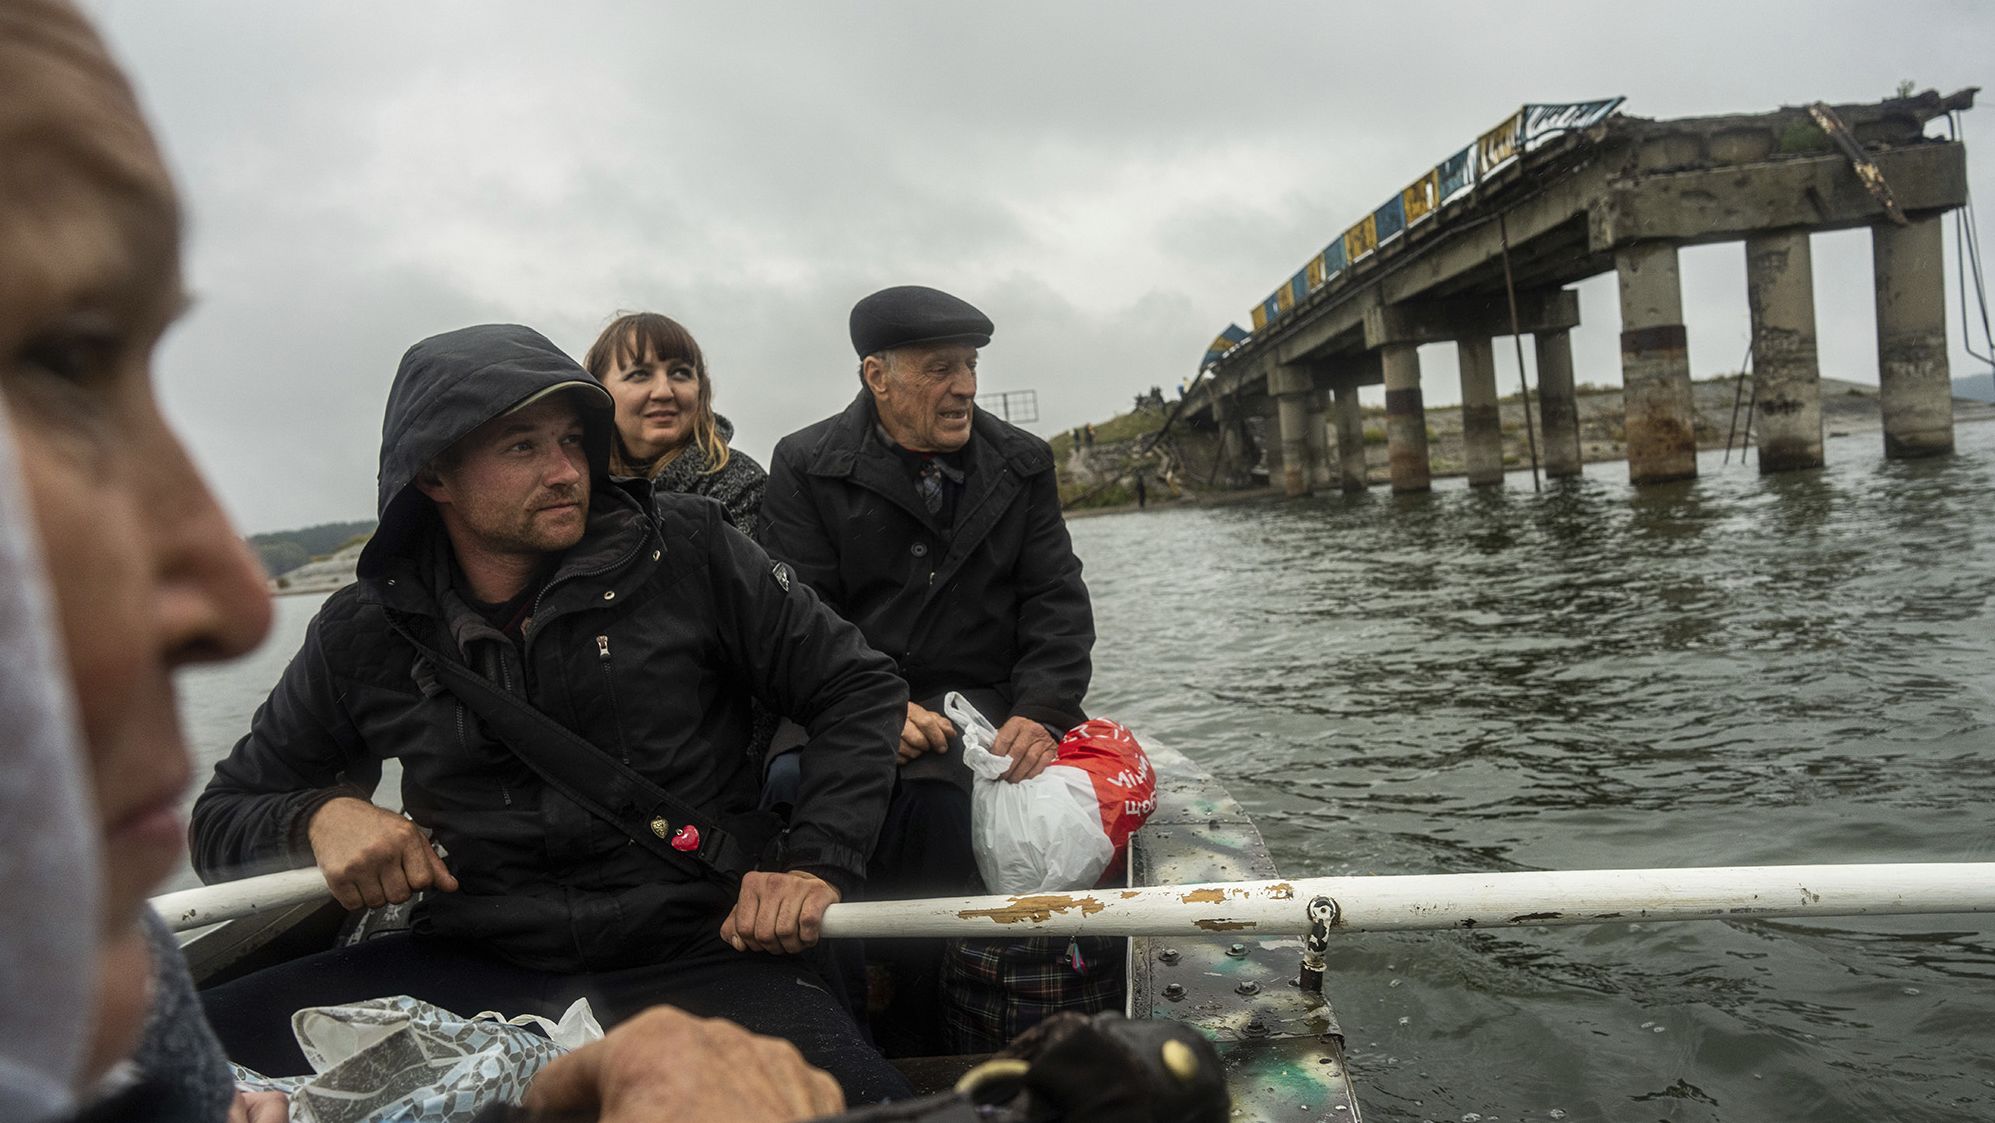 Anton Krasyvyi rows passengers across the Siverskyi-Donets river in front of a destroyed bridge, so they can visit relatives in Staryi-Saltiv, Ukraine, on September 27.